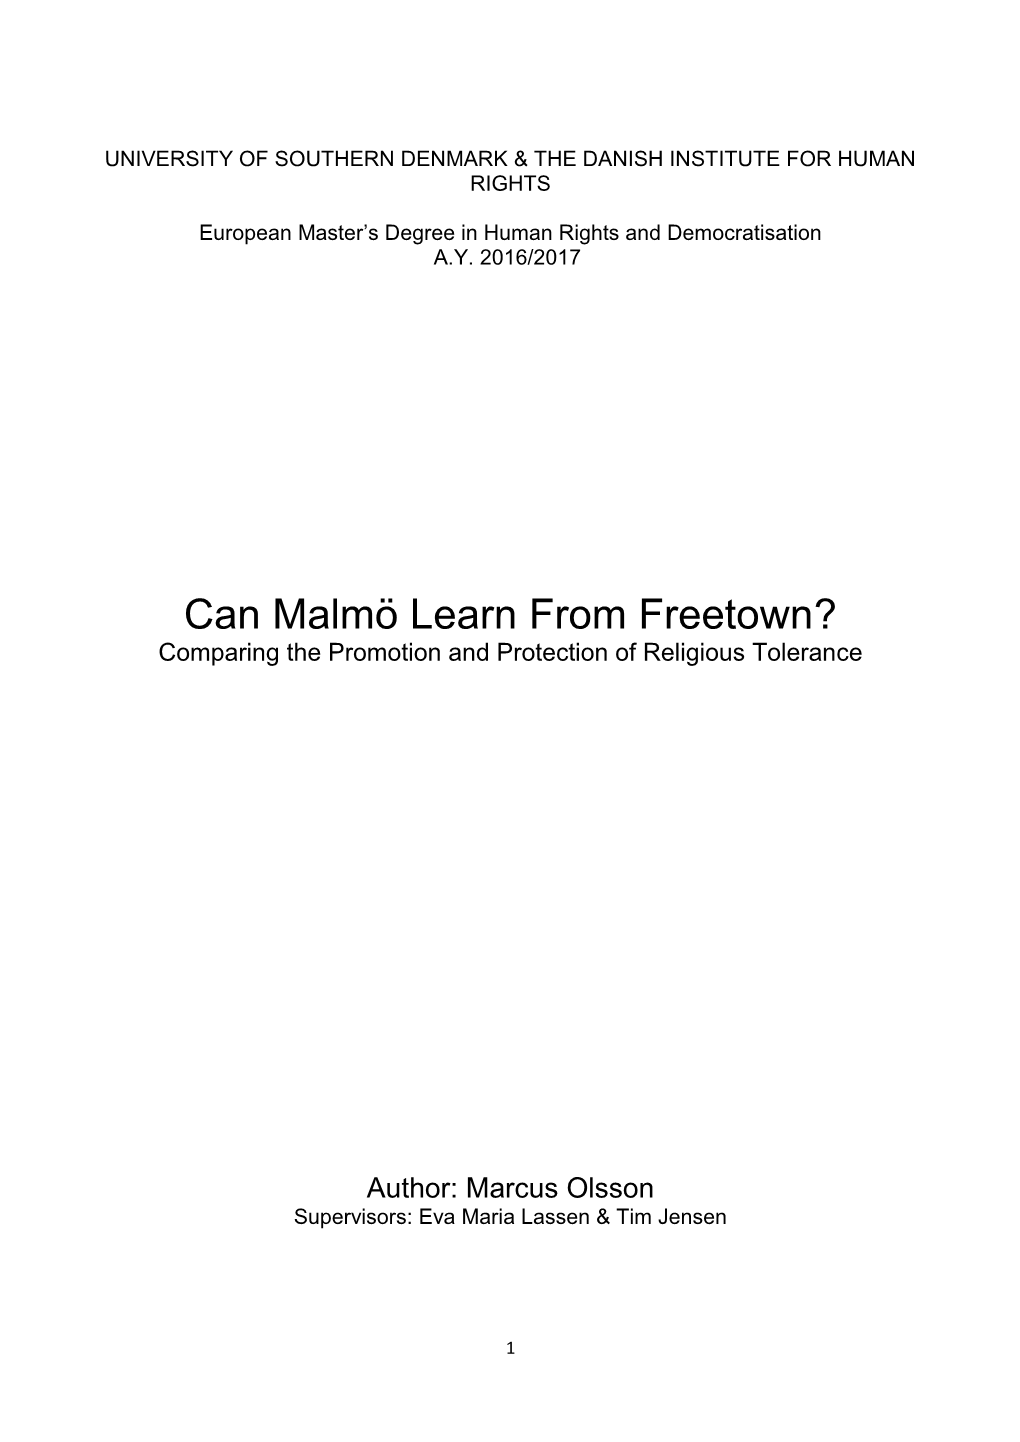 Can Malmö Learn from Freetown? Comparing the Promotion and Protection of Religious Tolerance